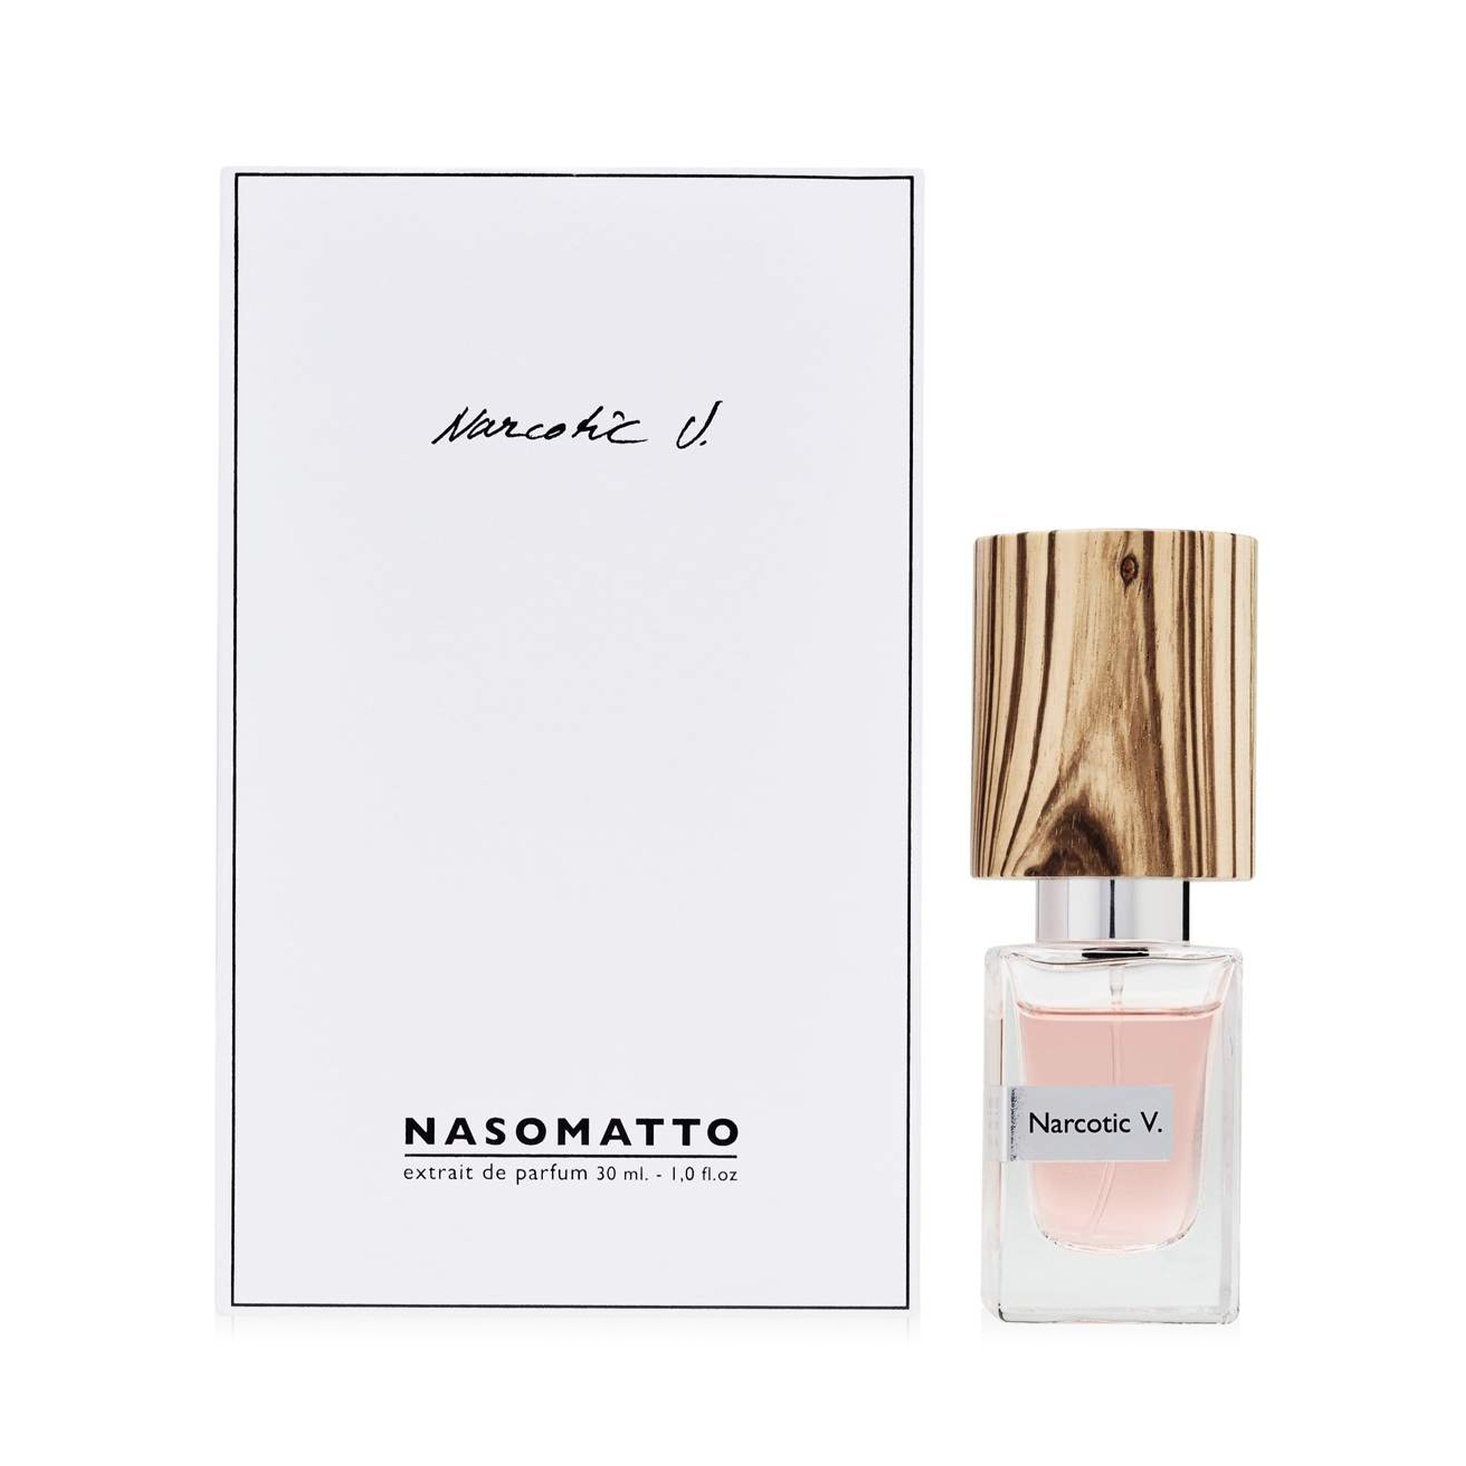 BEON.COM.AU Nasomatto creator Alessandro Gualtieri describes Narcotic Venus as "…a quest for the overwhelming addictive intensity of female sexual power.” Narcotic Venus is an intensely rich fragrance dominated by tropical florals and ruled by sublime tuberose. This Parfum Extrait is more potent than an... Nasomatto at BEON.COM.AU